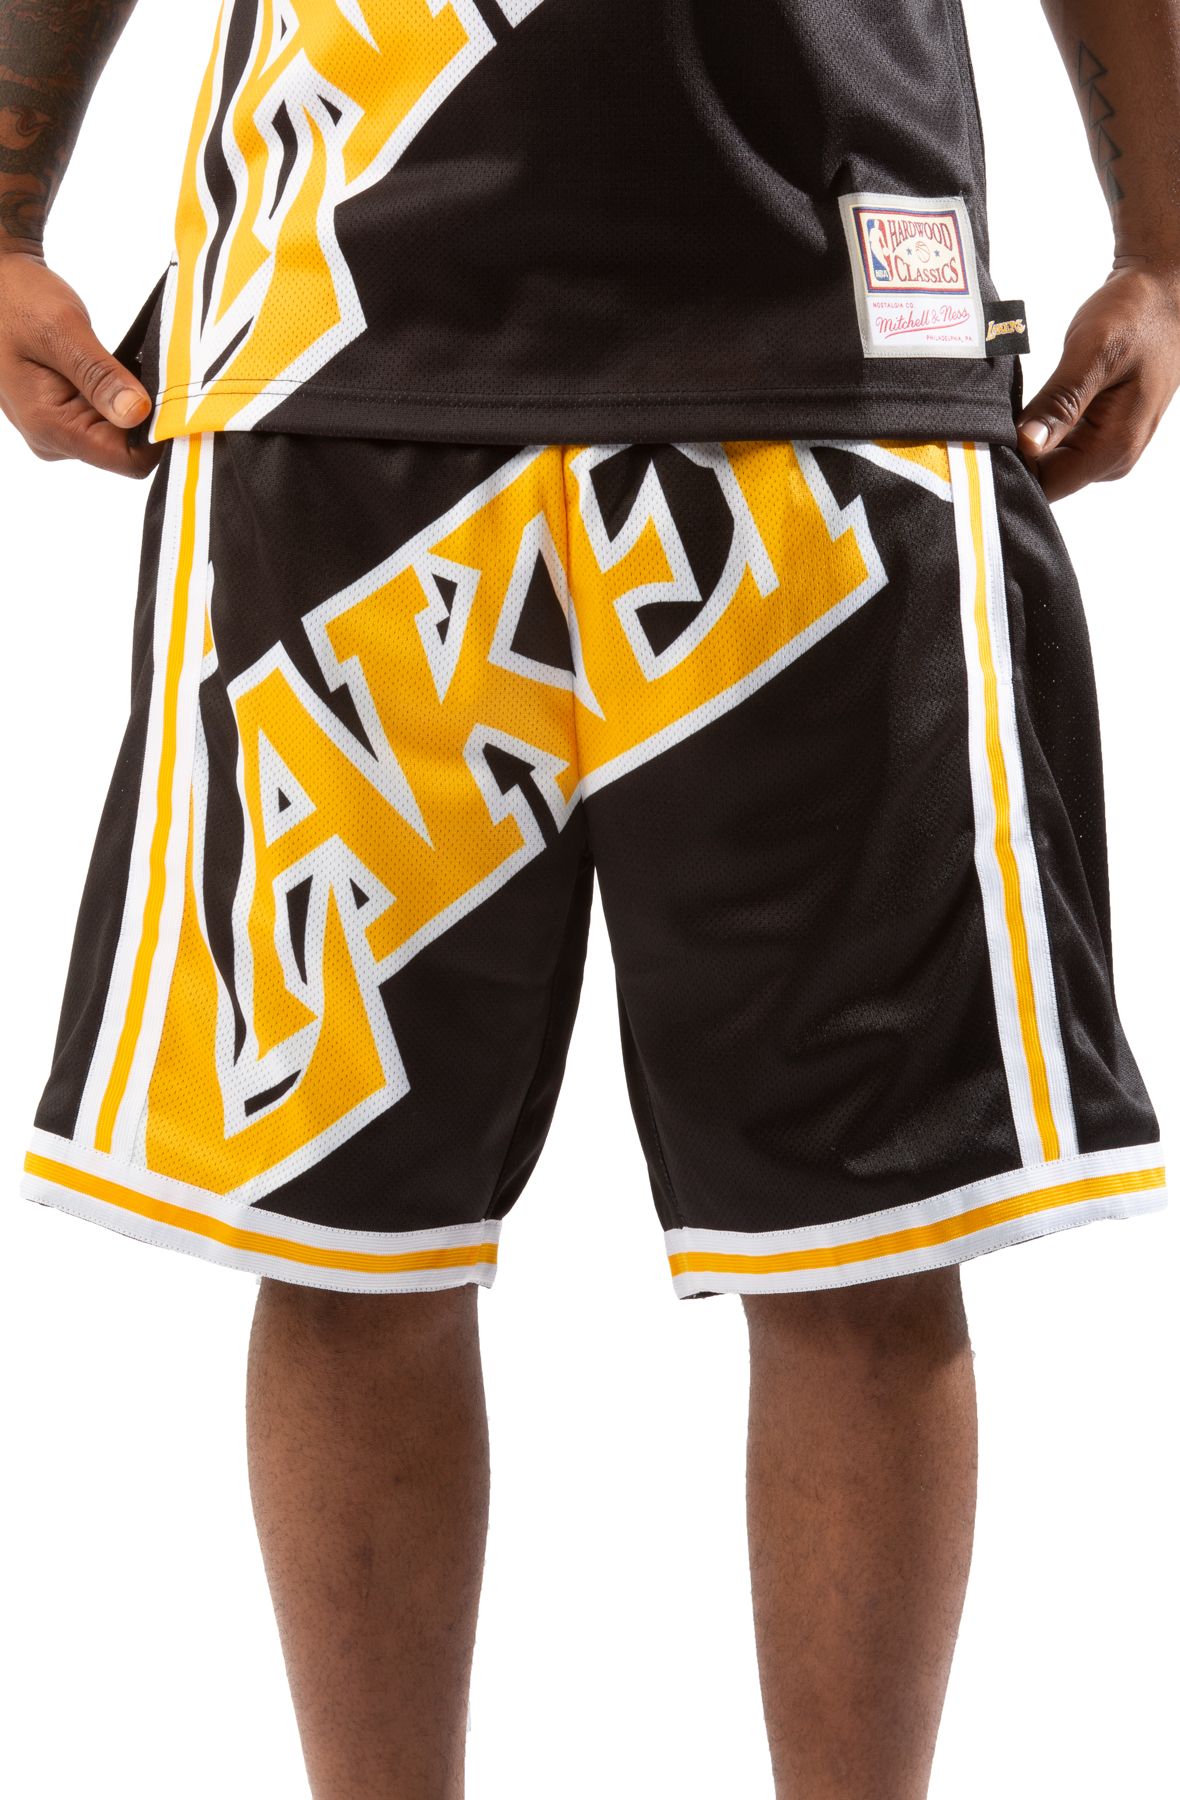 UNINTERRUPTED X Mitchell & Ness Legends Shorts Lakers